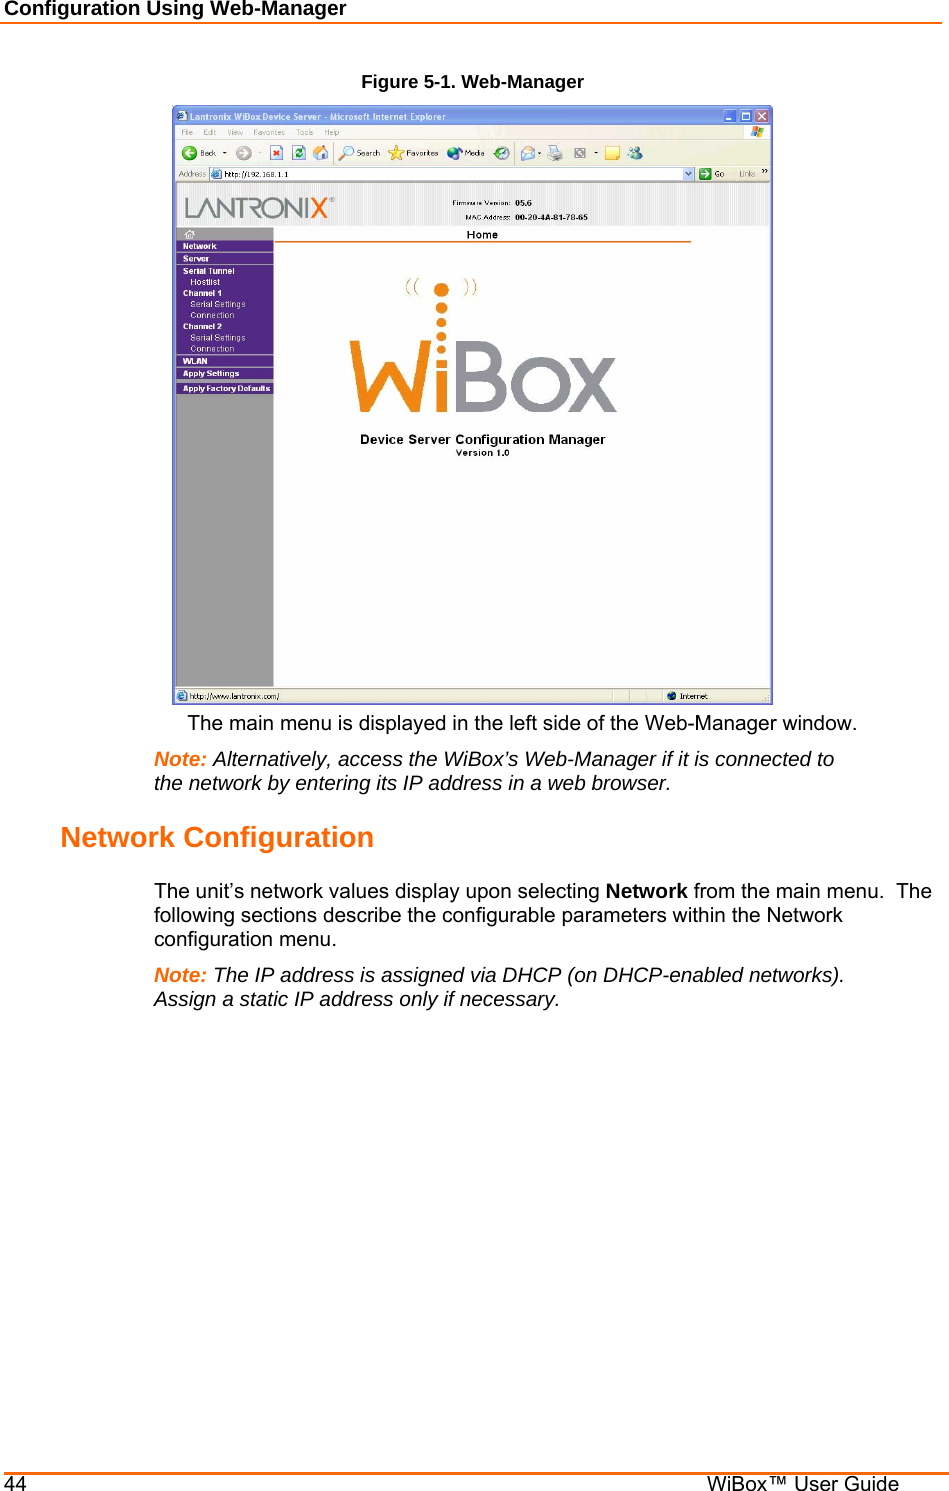 Configuration Using Web-Manager 44    WiBox™ User Guide Figure 5-1. Web-Manager    The main menu is displayed in the left side of the Web-Manager window. Note: Alternatively, access the WiBox’s Web-Manager if it is connected to the network by entering its IP address in a web browser. Network Configuration The unit’s network values display upon selecting Network from the main menu.  The following sections describe the configurable parameters within the Network configuration menu. Note: The IP address is assigned via DHCP (on DHCP-enabled networks).  Assign a static IP address only if necessary. 